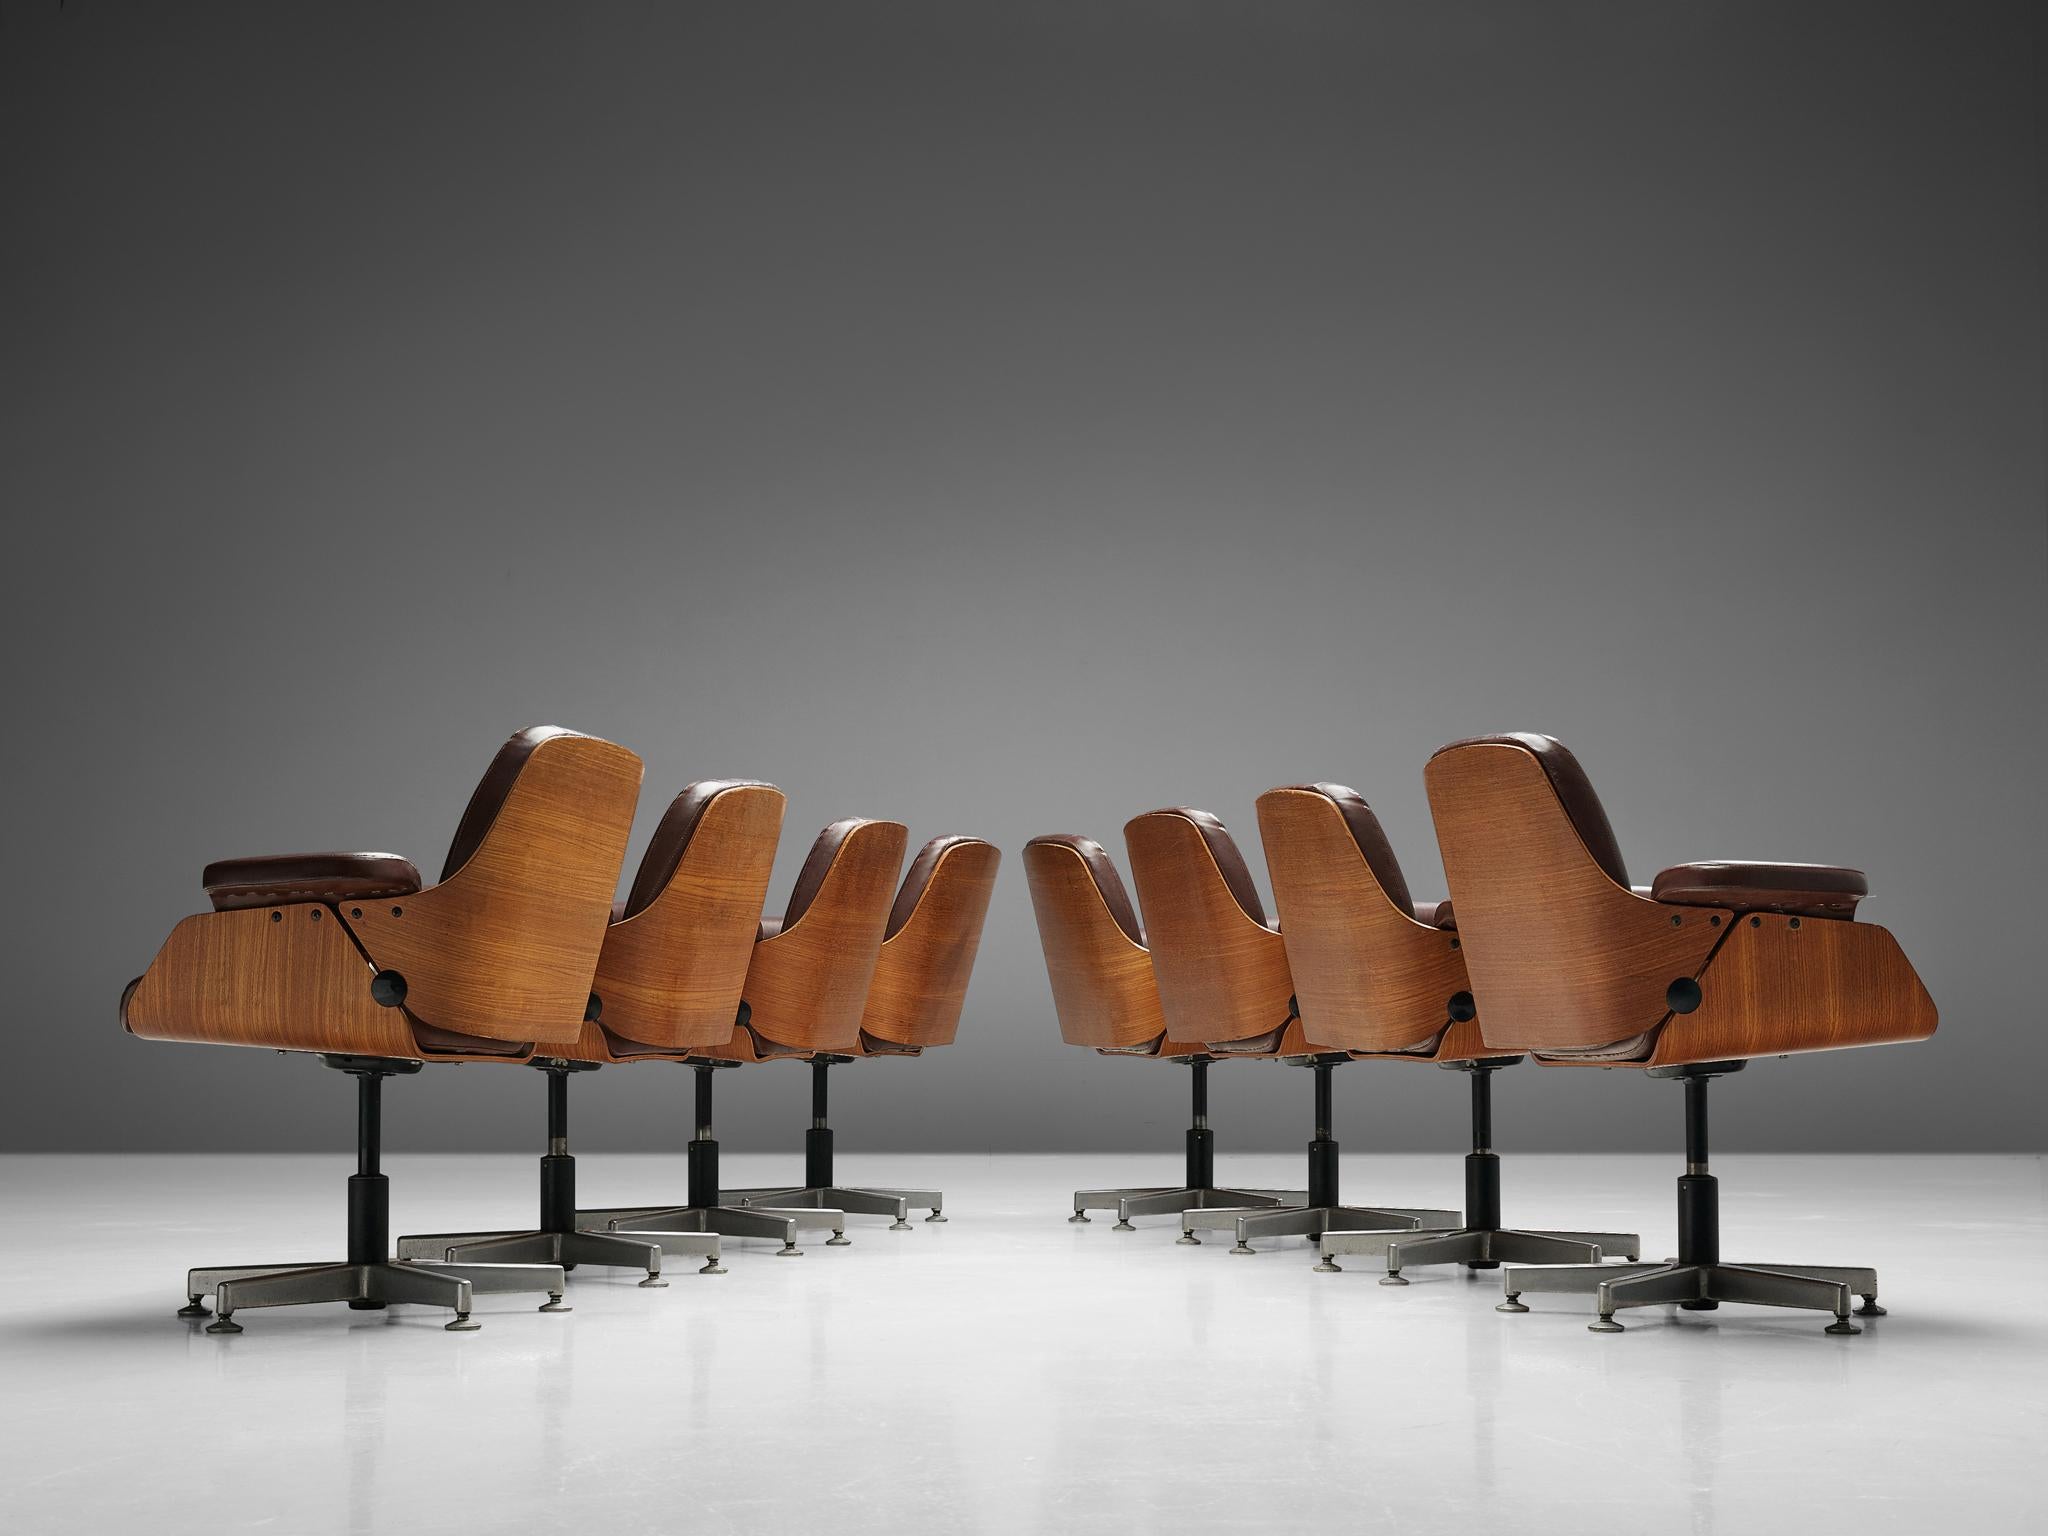 Carlo Fongaro for Dinamarquesa, set of eight armchairs model ‘Probjeto’, mahogany, leather, aluminium, Brazil, 1975

Set of eight office chairs designed by Carlo Fongaro and manufactured by Dinamarquesa, Brazil, 1975. These chairs have a splendid